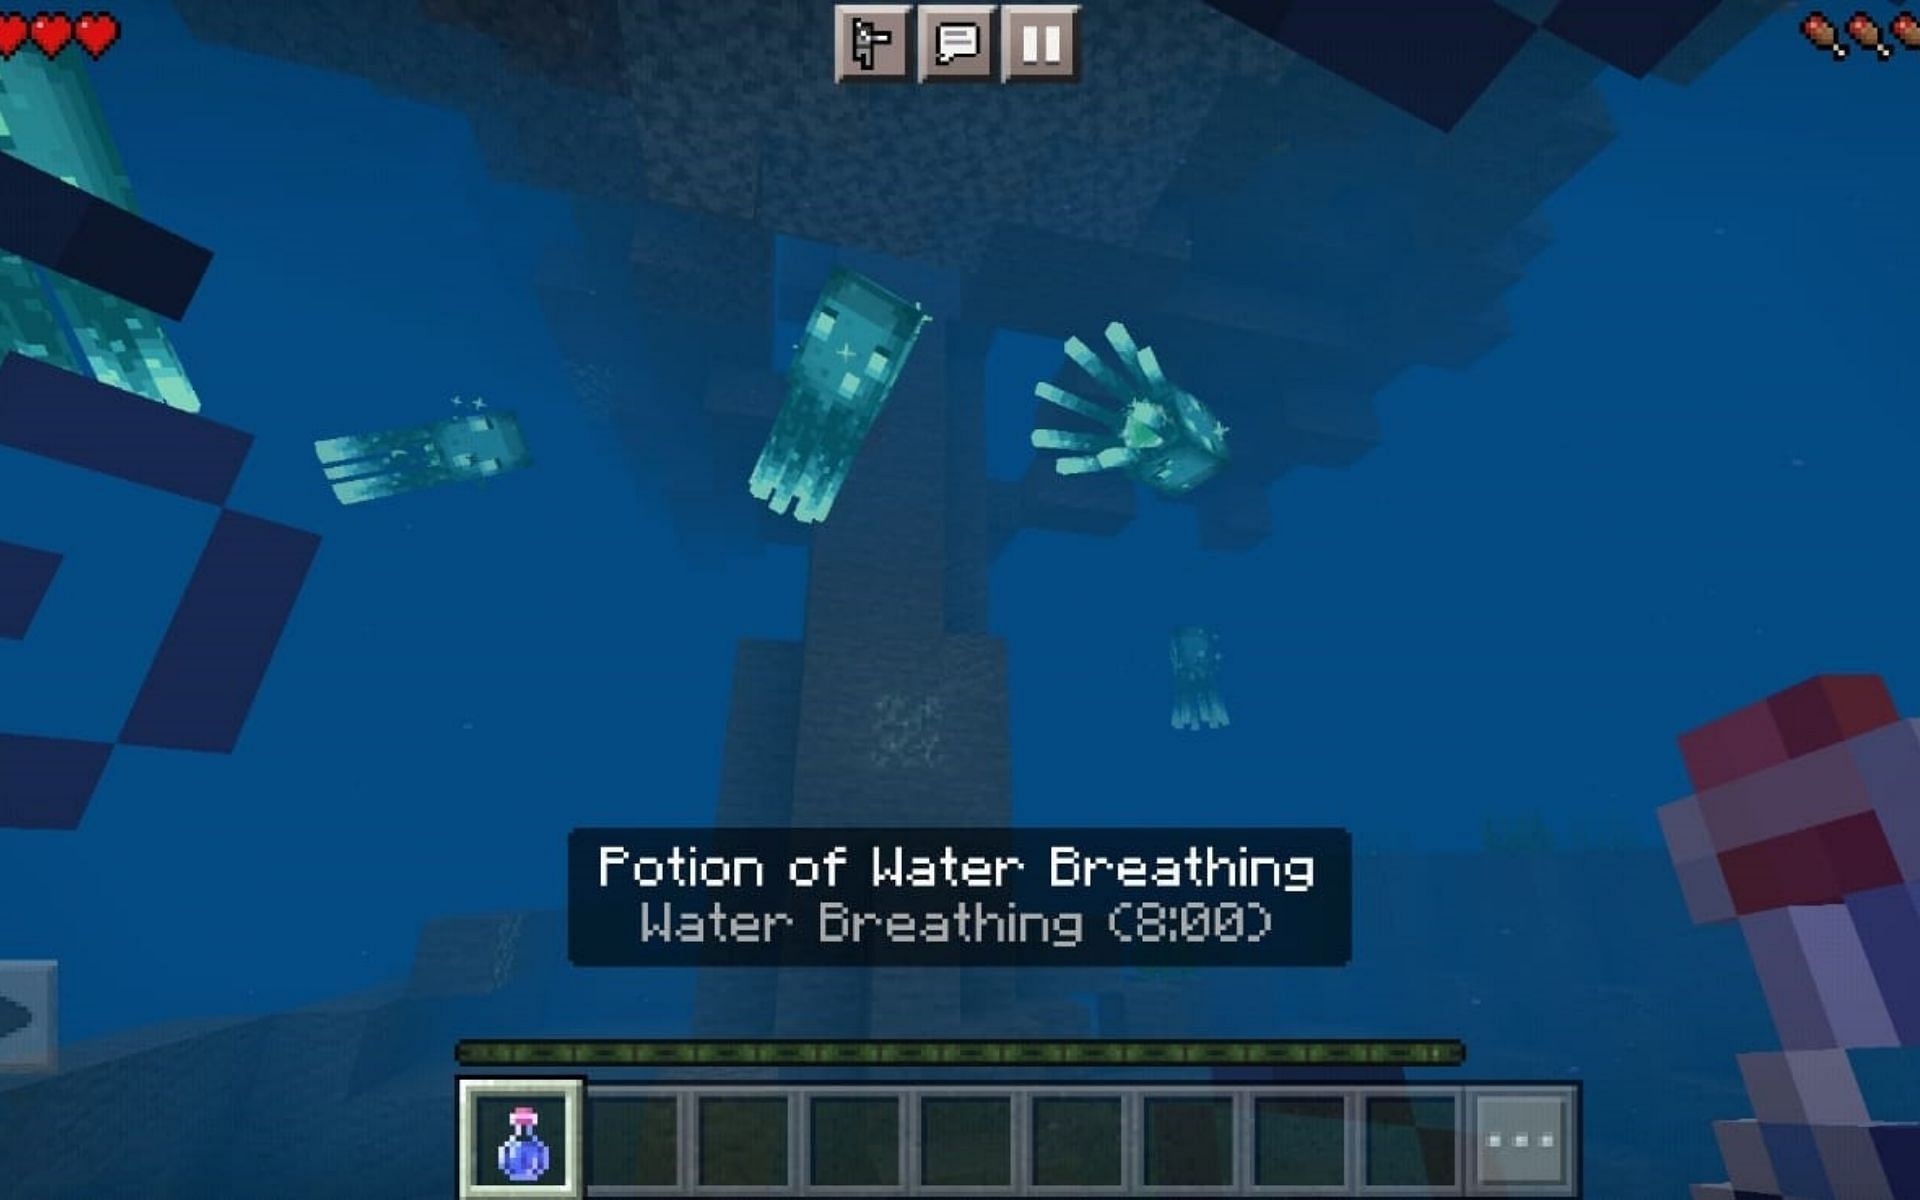 The water breathing potion allows players to breathe underwater with depletion in the oxygen bar (Image via Minecraft))